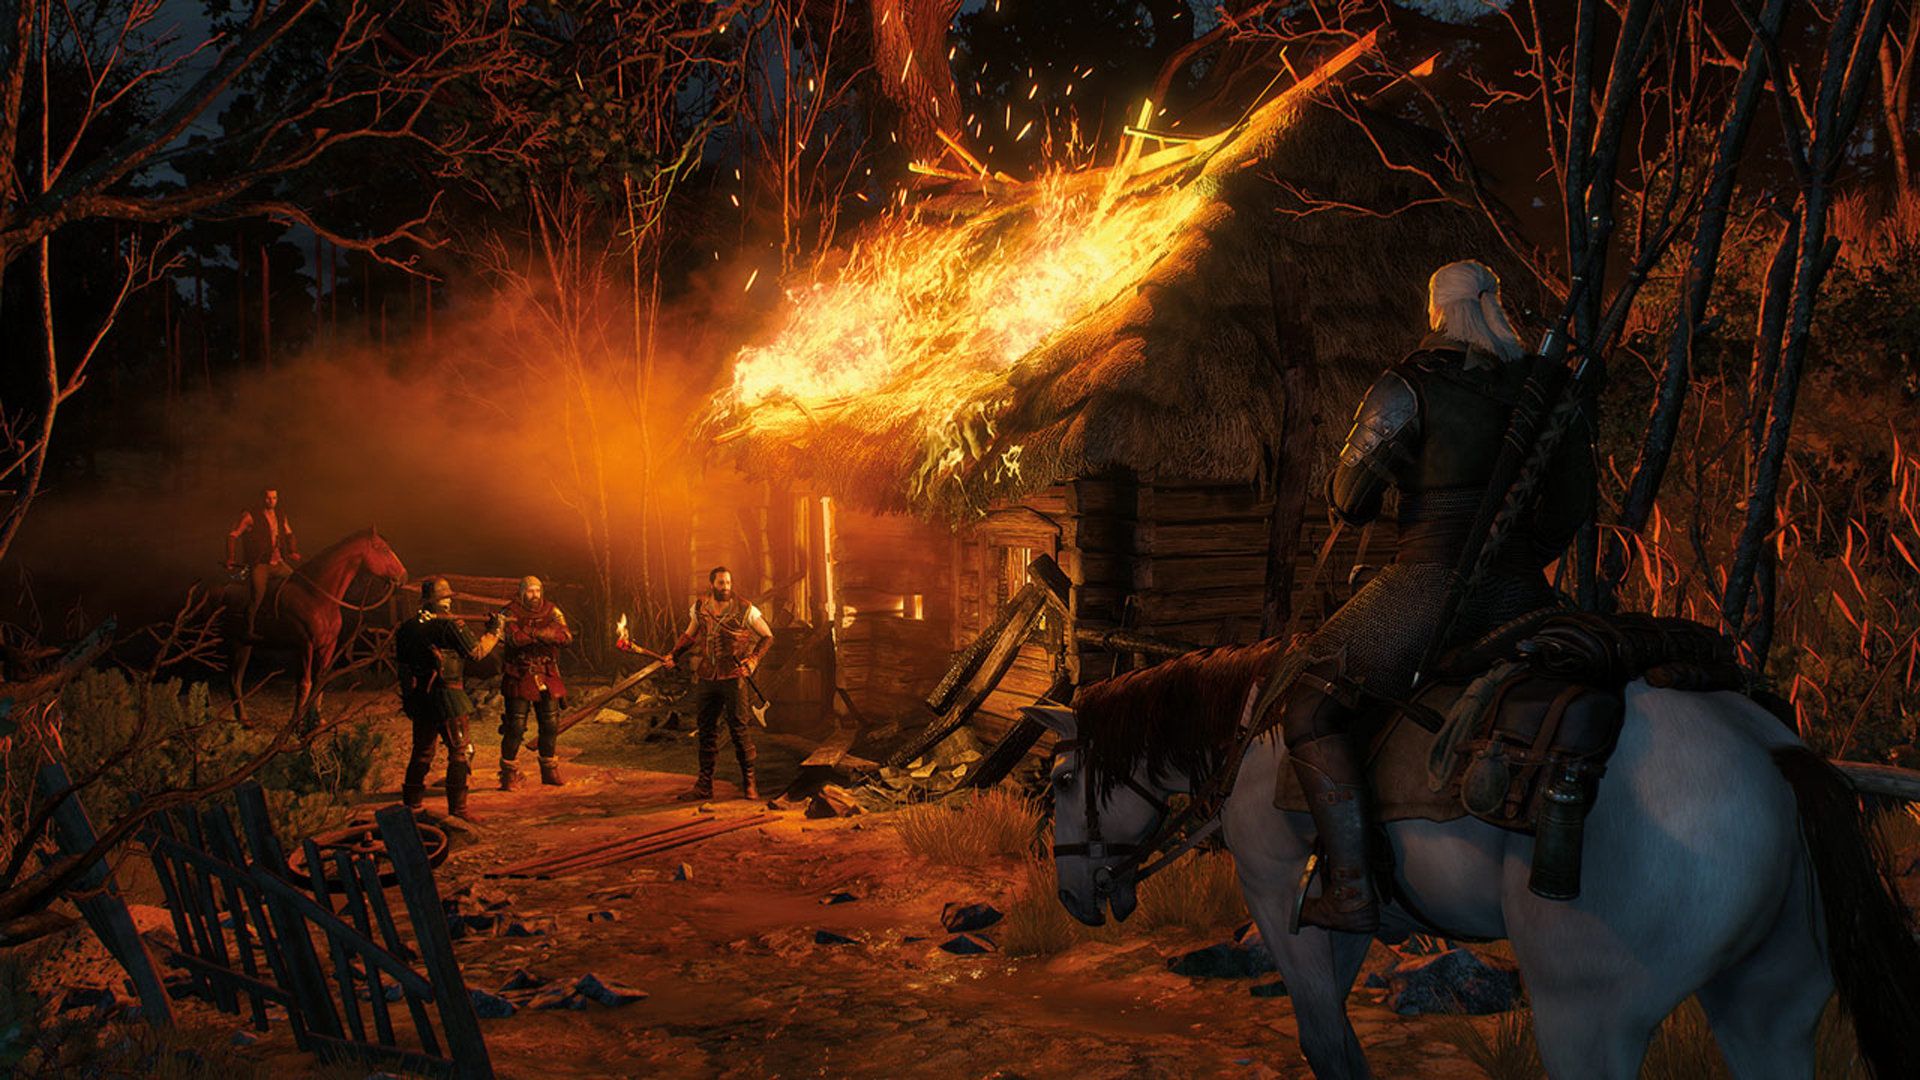 Wild hunt hunting games. The Witcher 3 Wild Hunt. Ведьмак 3: Дикая охота. The Witcher 3 Wild Hunt Ведьмак 3 Дикая охота. The Witcher 3: Wild Hunt Xbox.